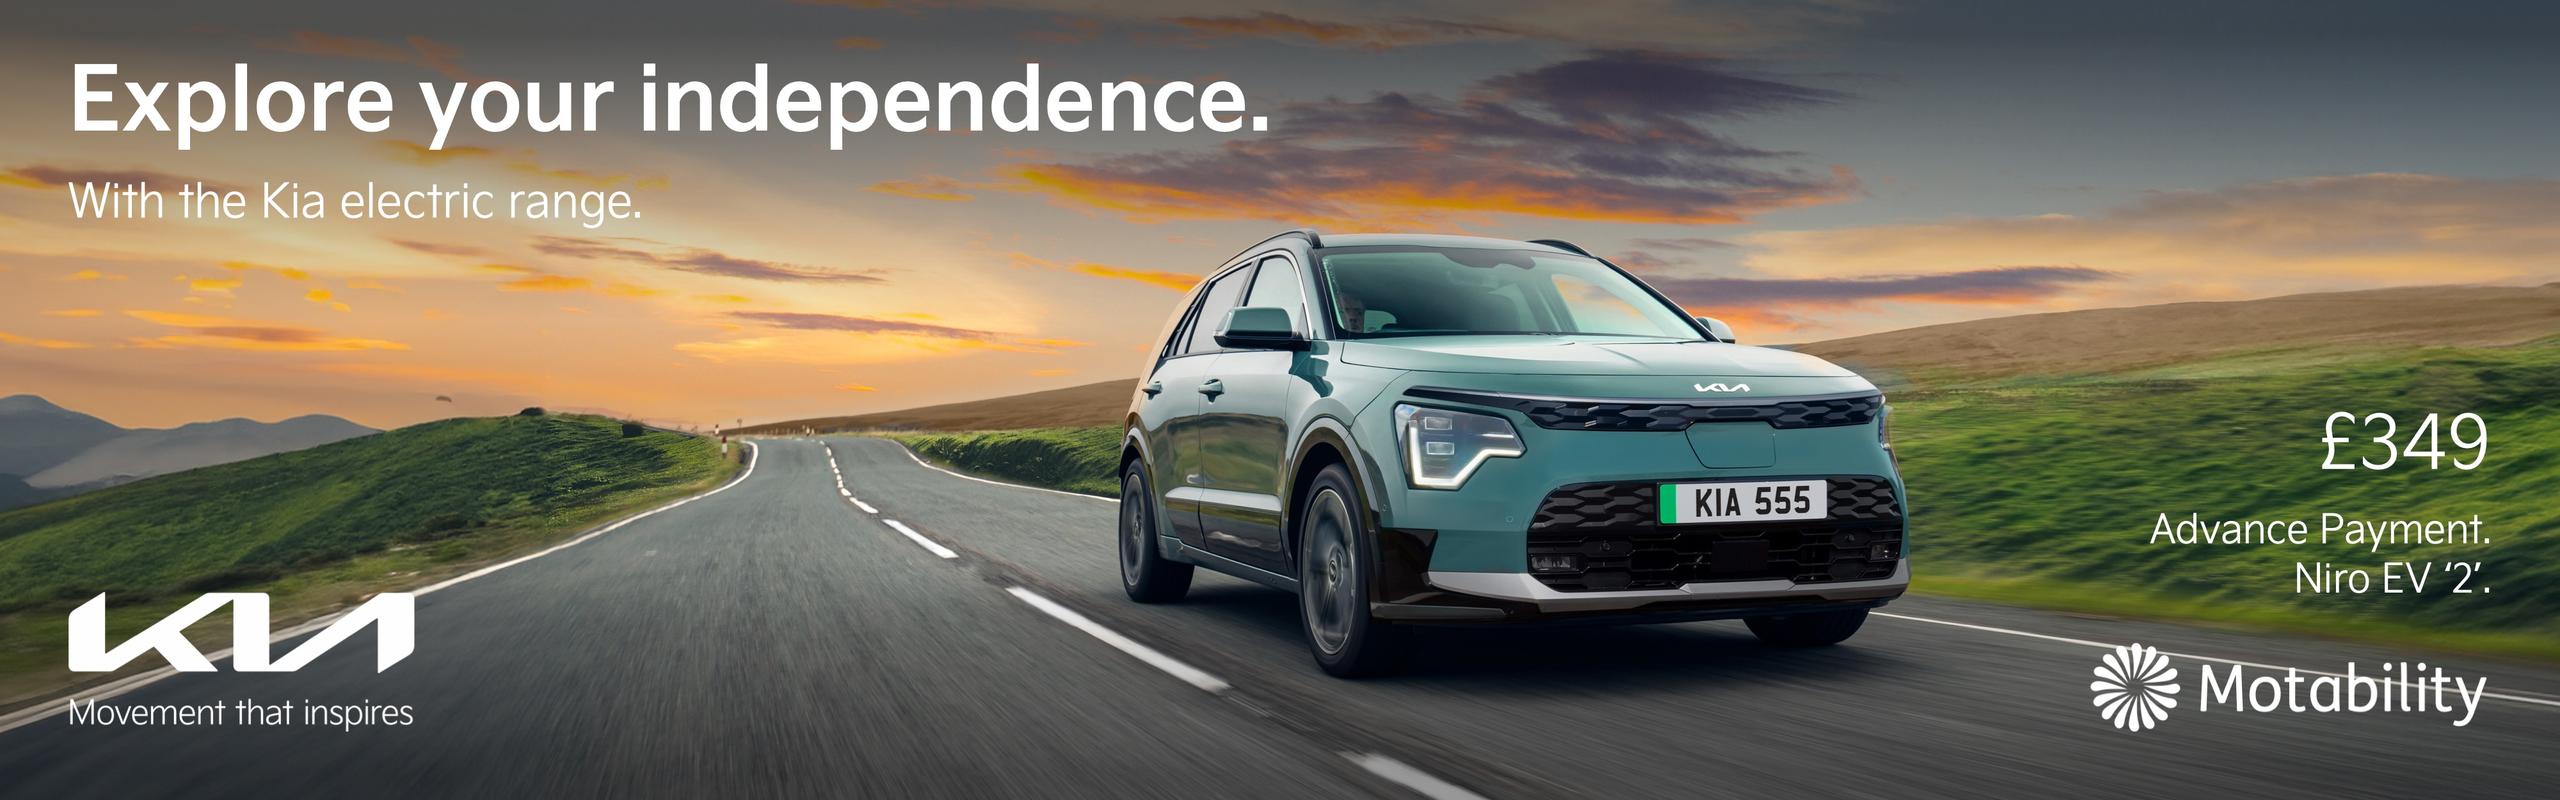 Motability: Niro EV. Taking care of your freedom. £499 Advance Payment. T&Cs apply. Spec may vary.